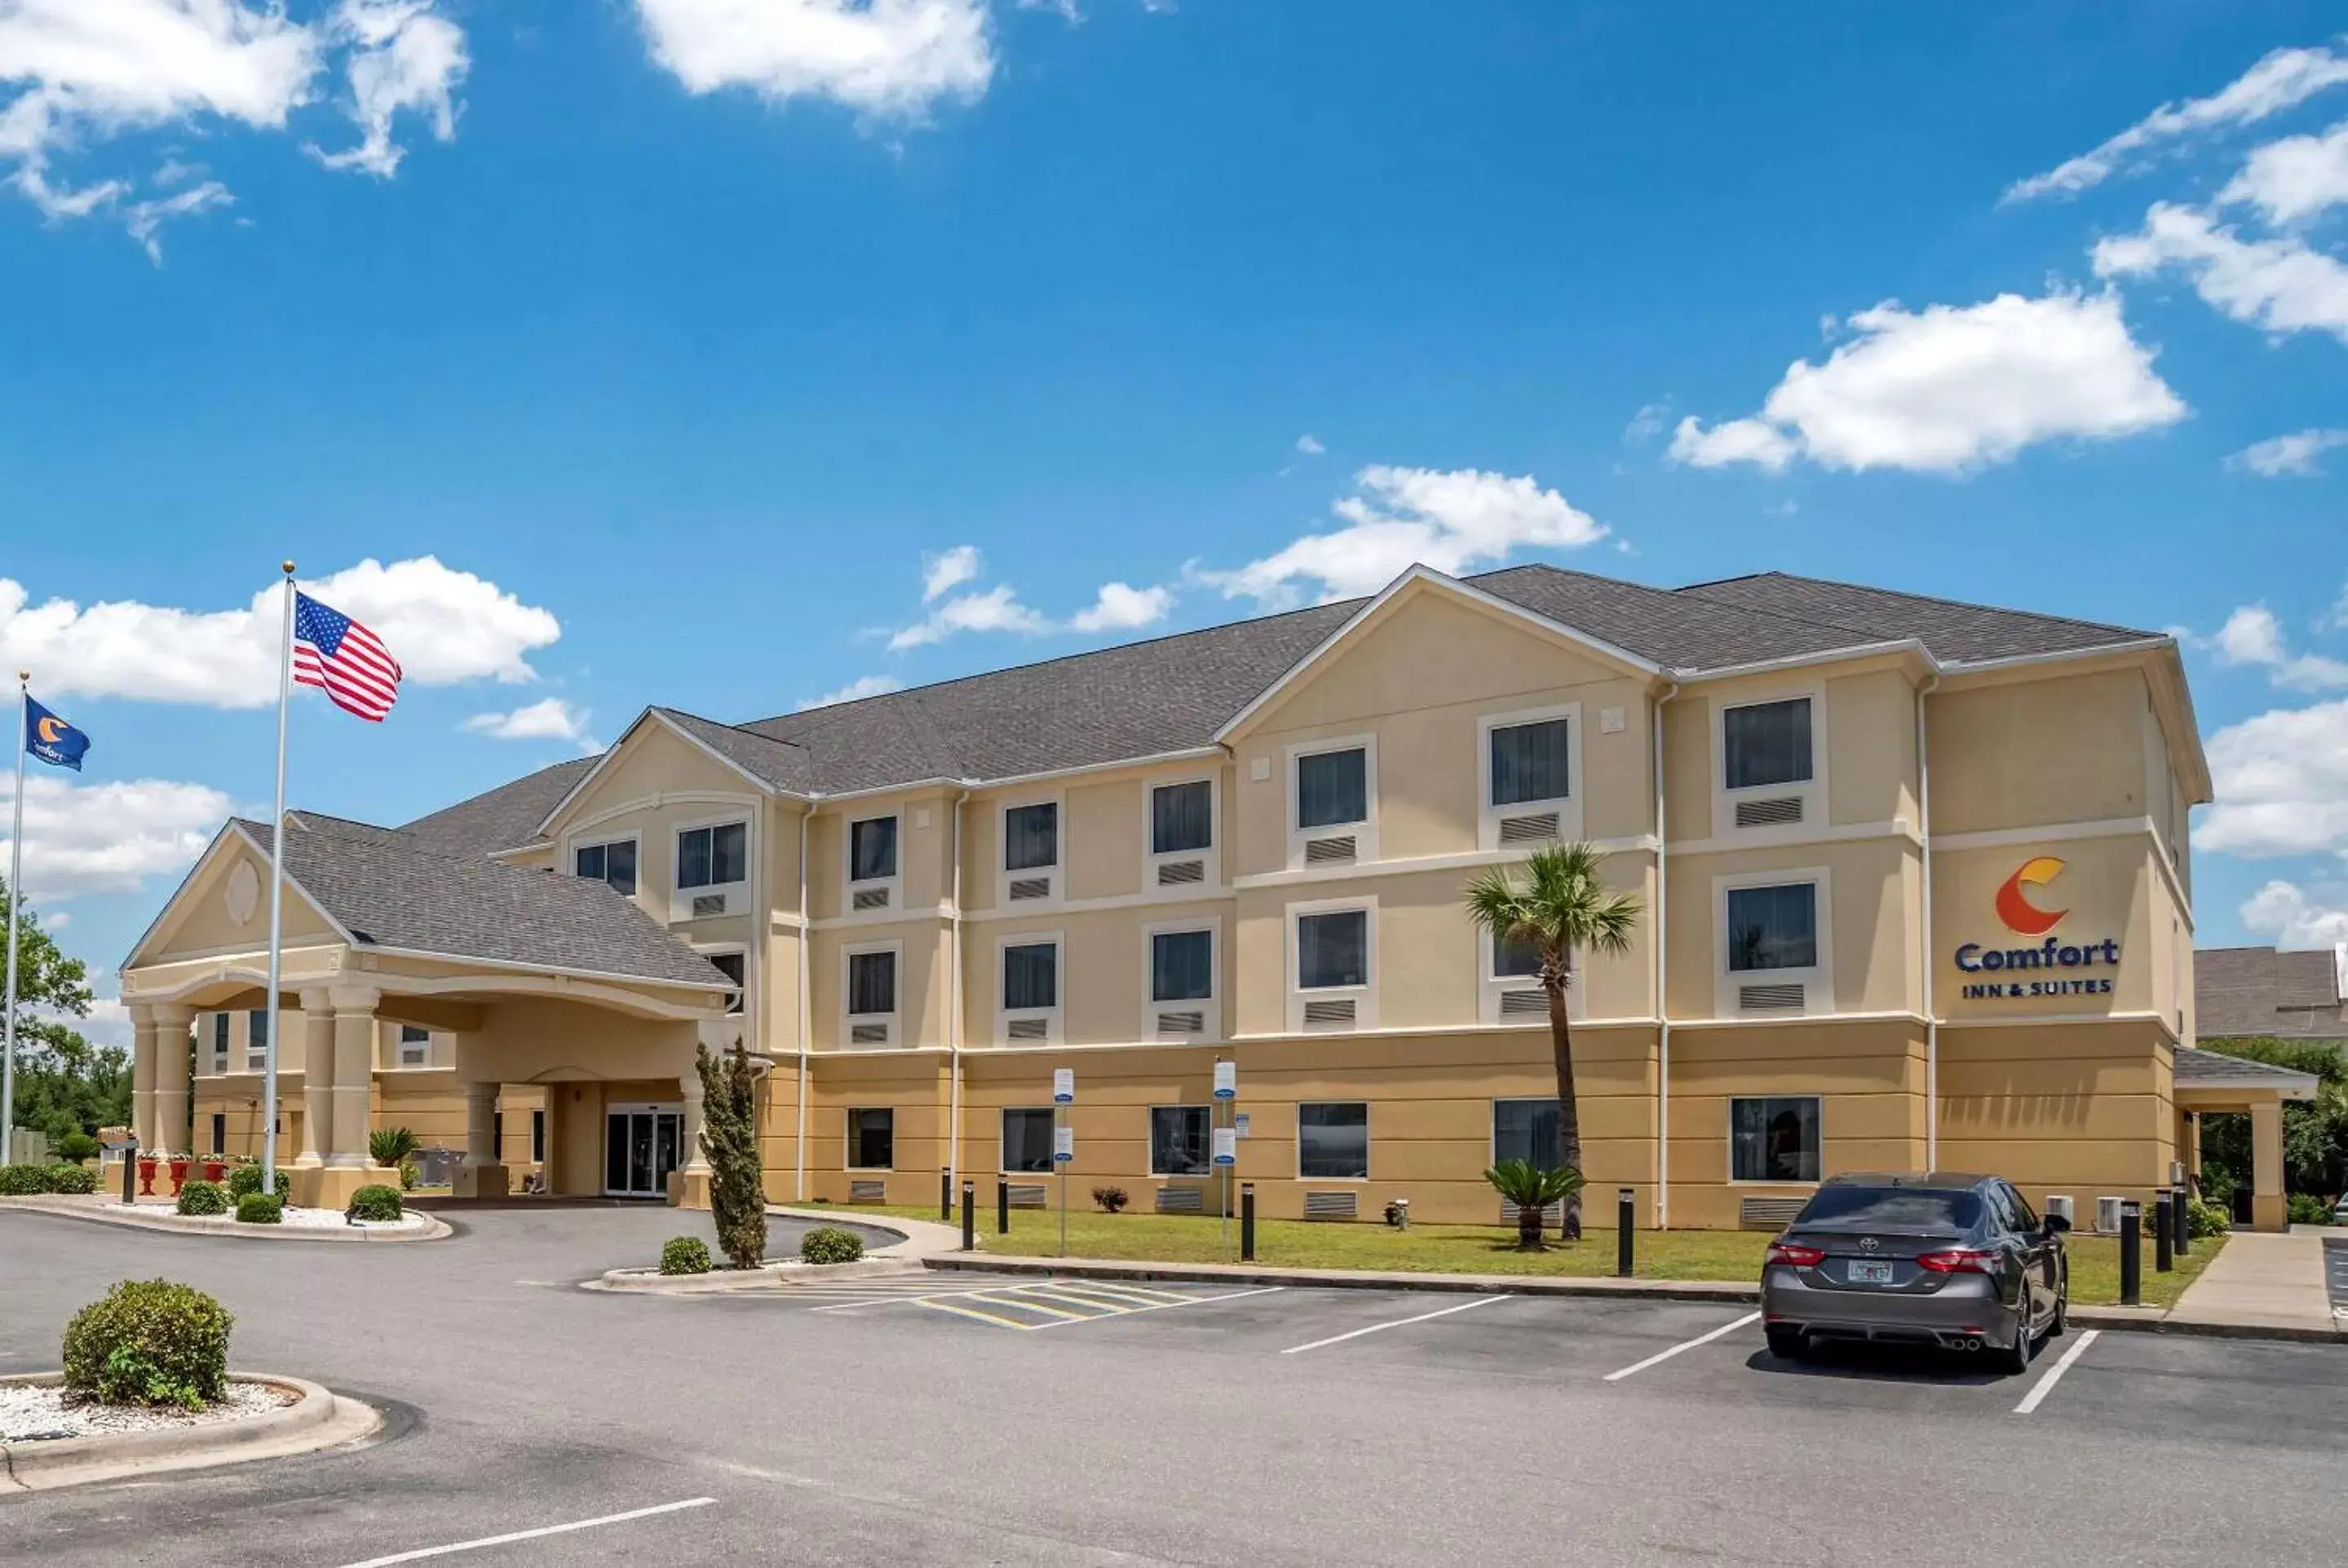 Property Building in Comfort Inn & Suites Marianna I-10